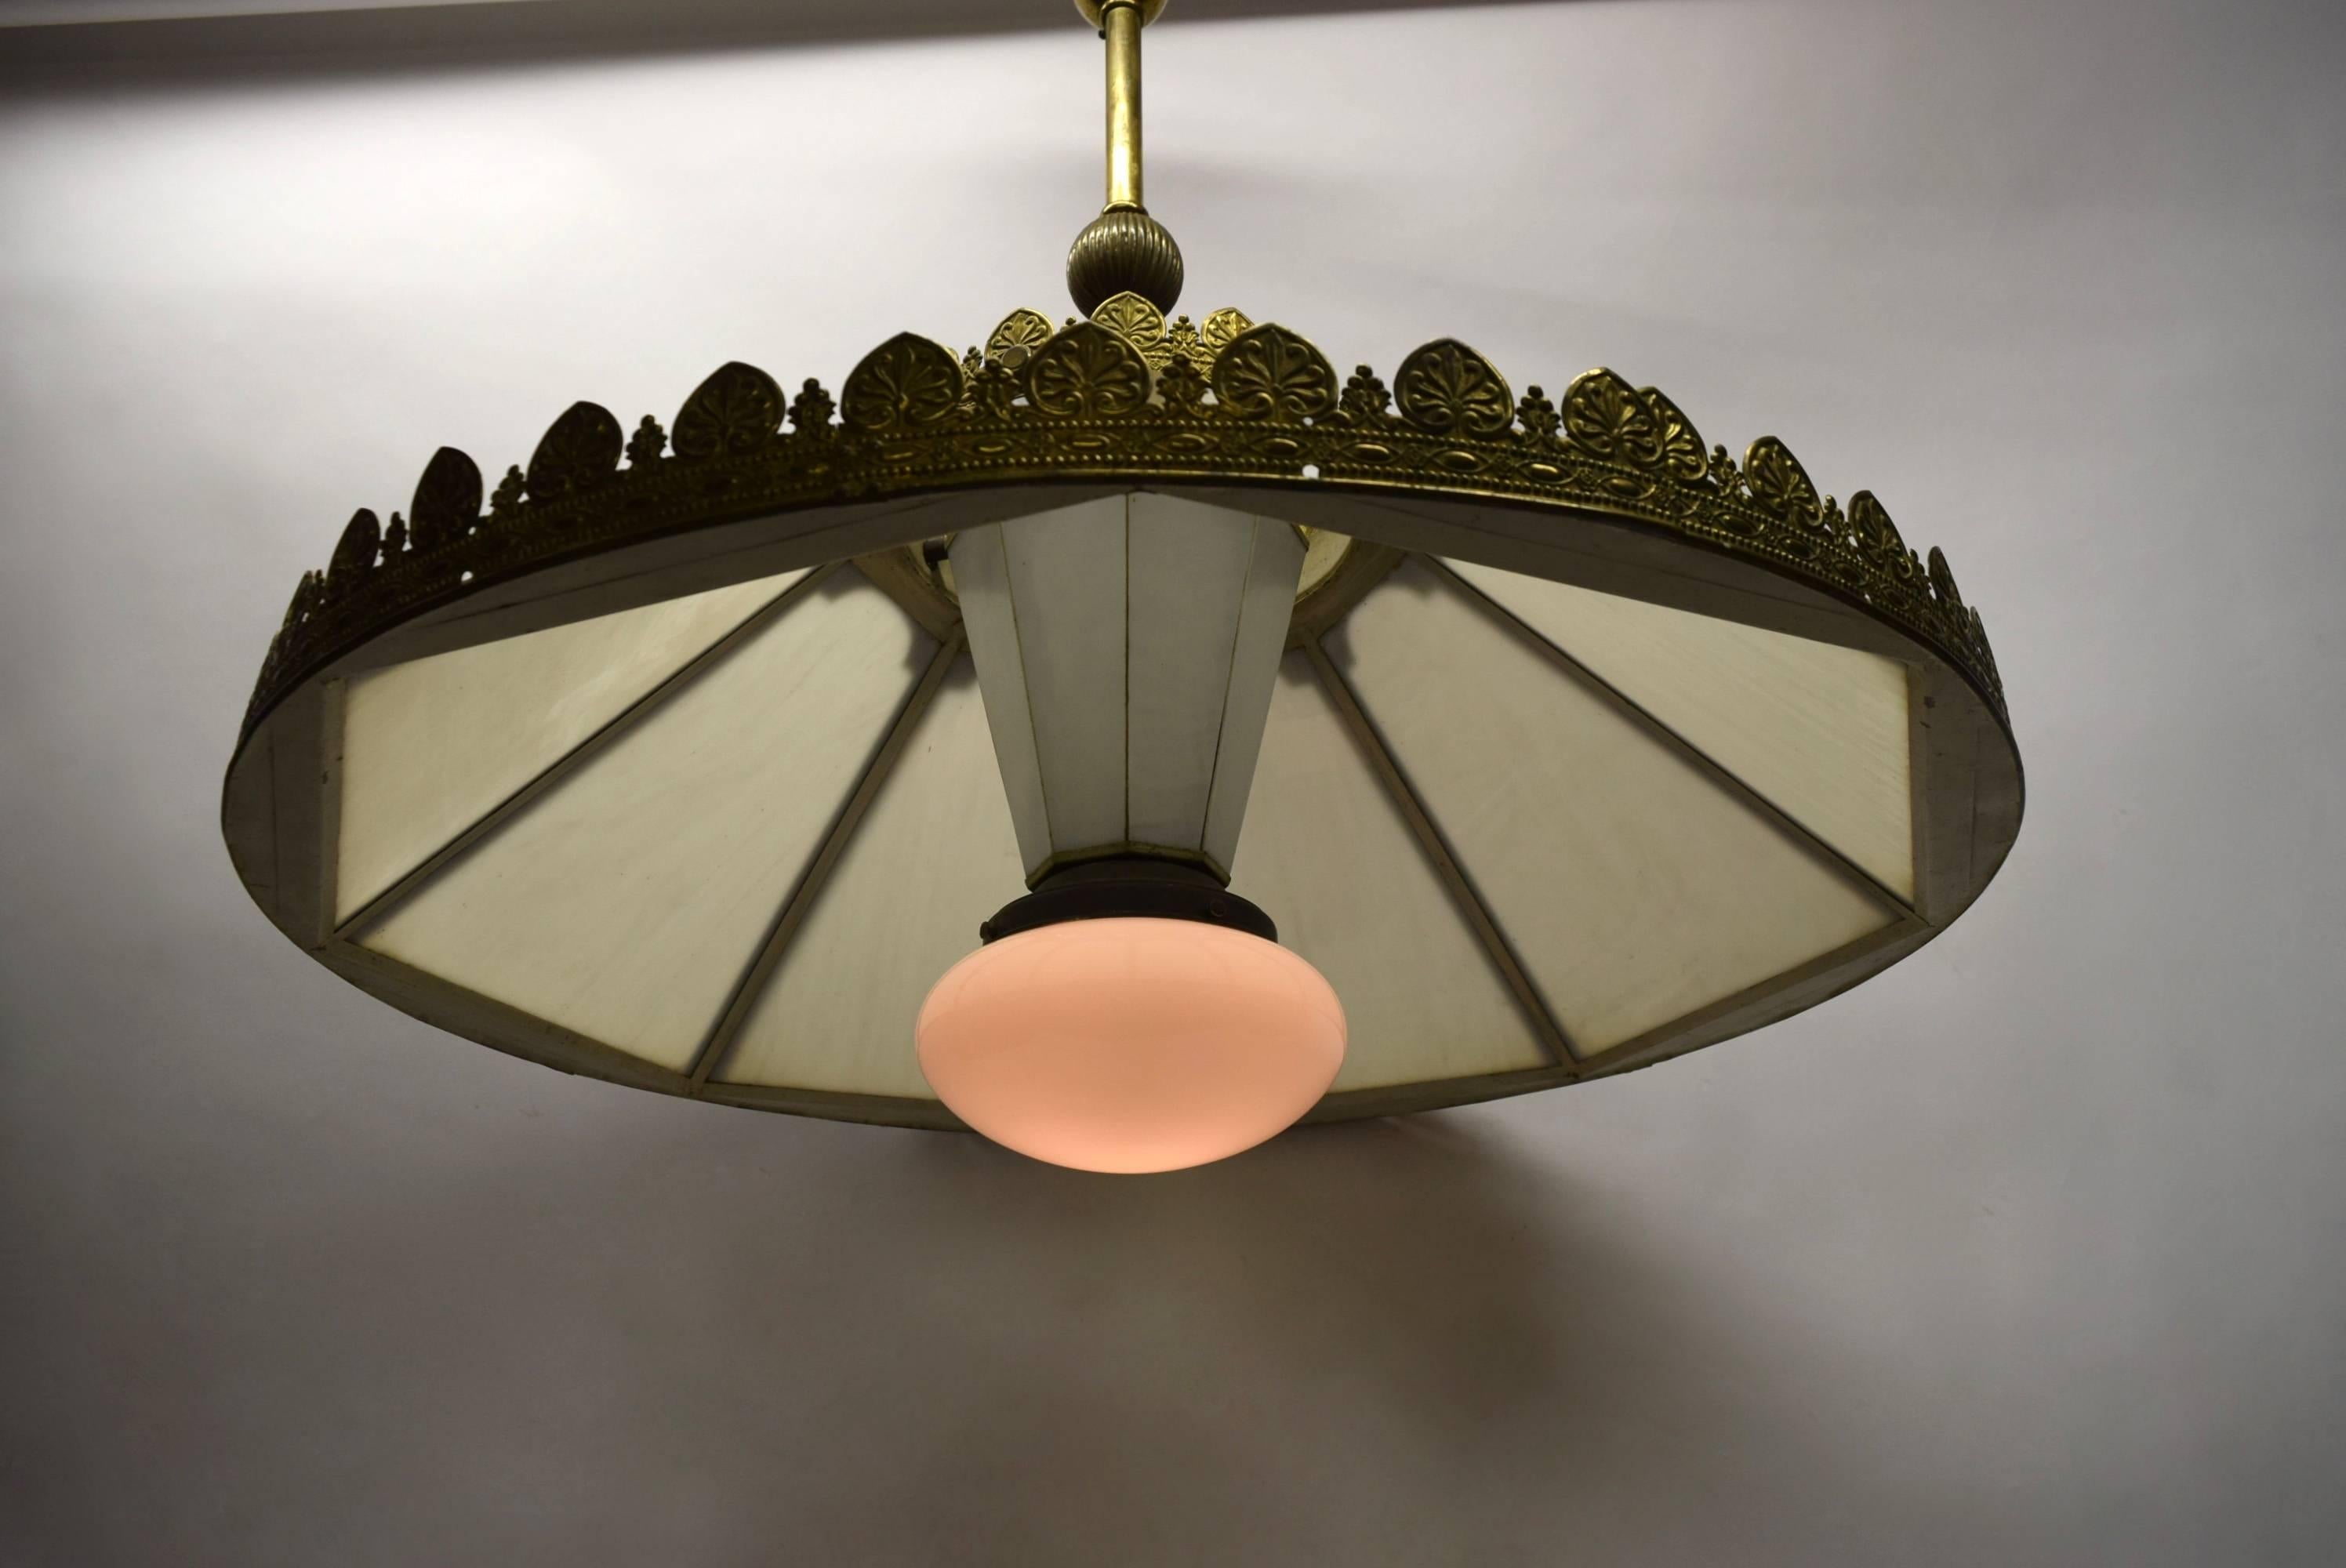 Ceiling Light by I.P. Frink 1880s USA Originally Oil Lit, Converted to Electric In Excellent Condition For Sale In Jersey City, NJ